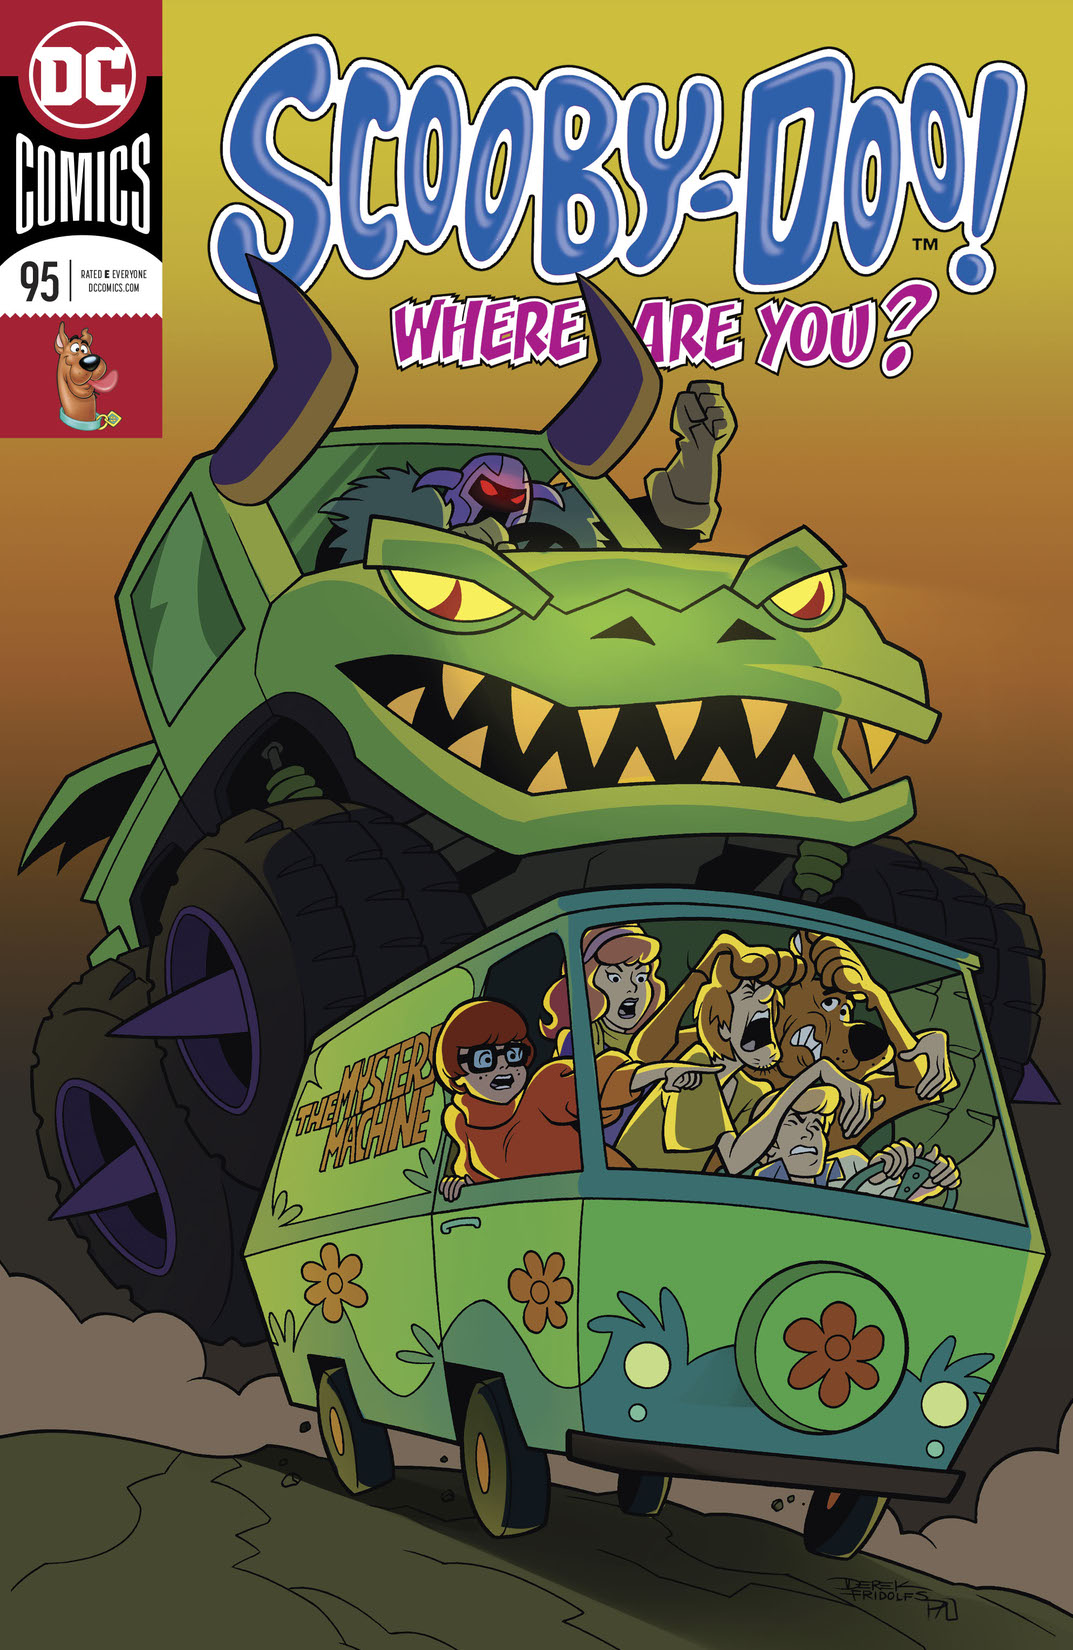 Scooby-Doo, Where Are You? #95 preview images